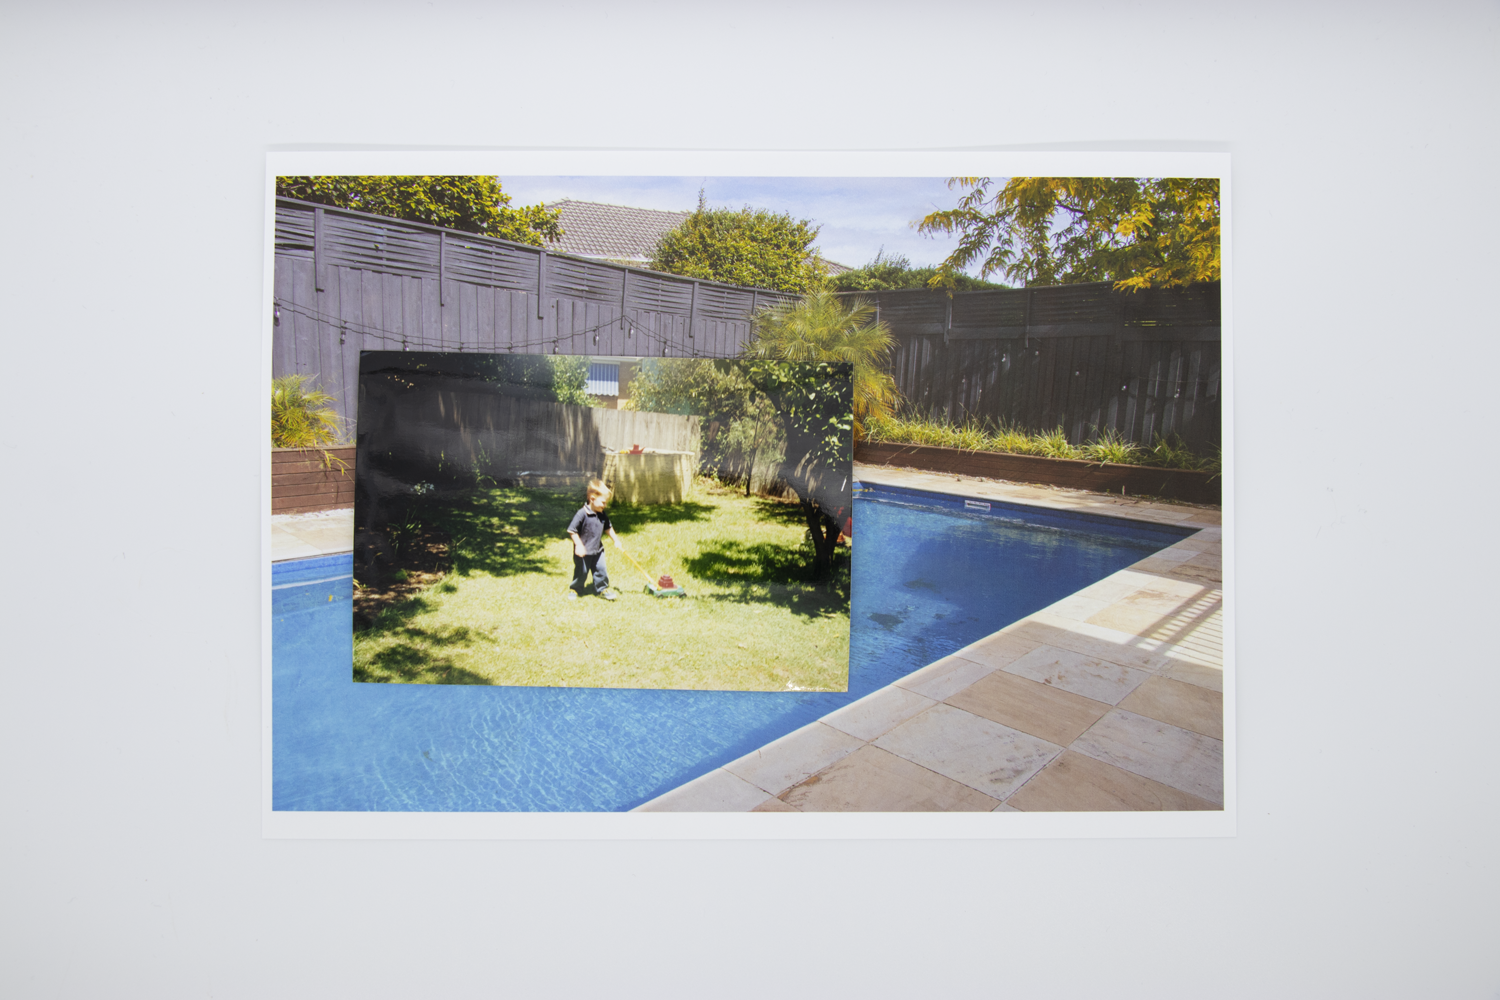 Coloured photograph depicting child pushing toy lawnmower in suburban backyard. Photo is bordered by secondary image of blue pool in suburban backyard.